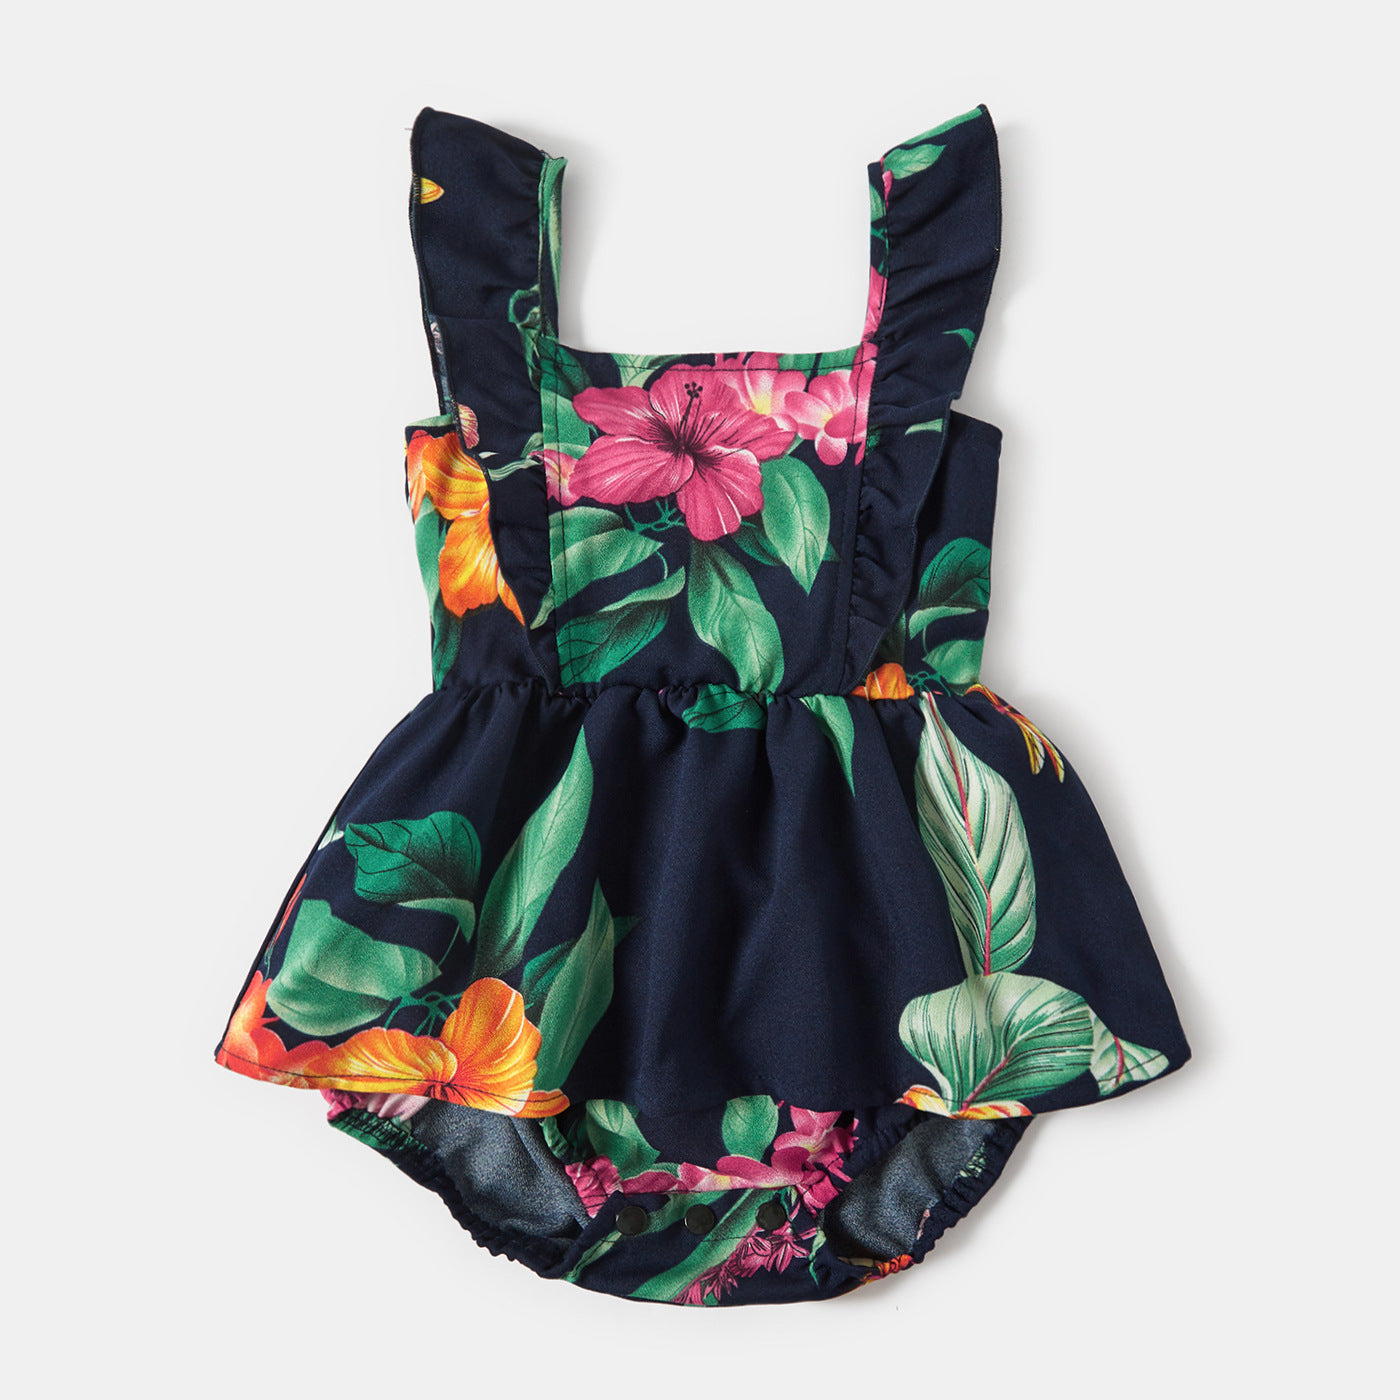 Family Matching All Over Floral Print Ruffle Deep V Neck Sleeveless Dresses and T-shirts Sets